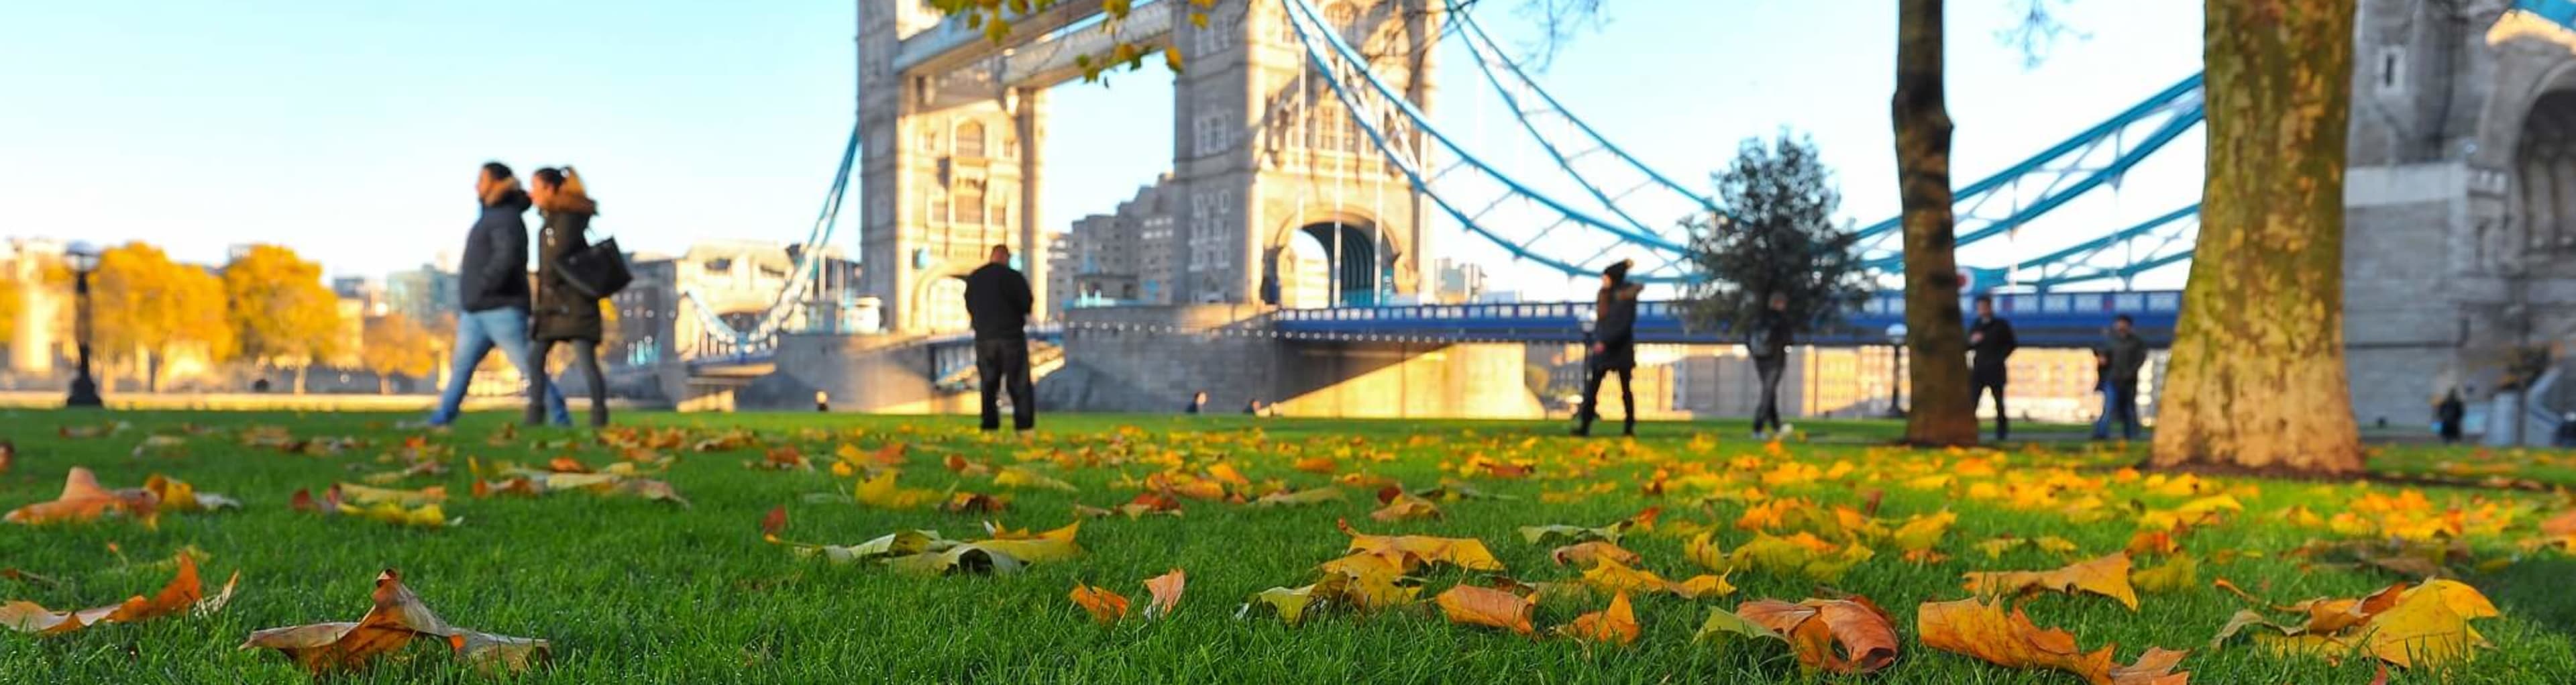 The Tower of London will a foreground of fallen leaves